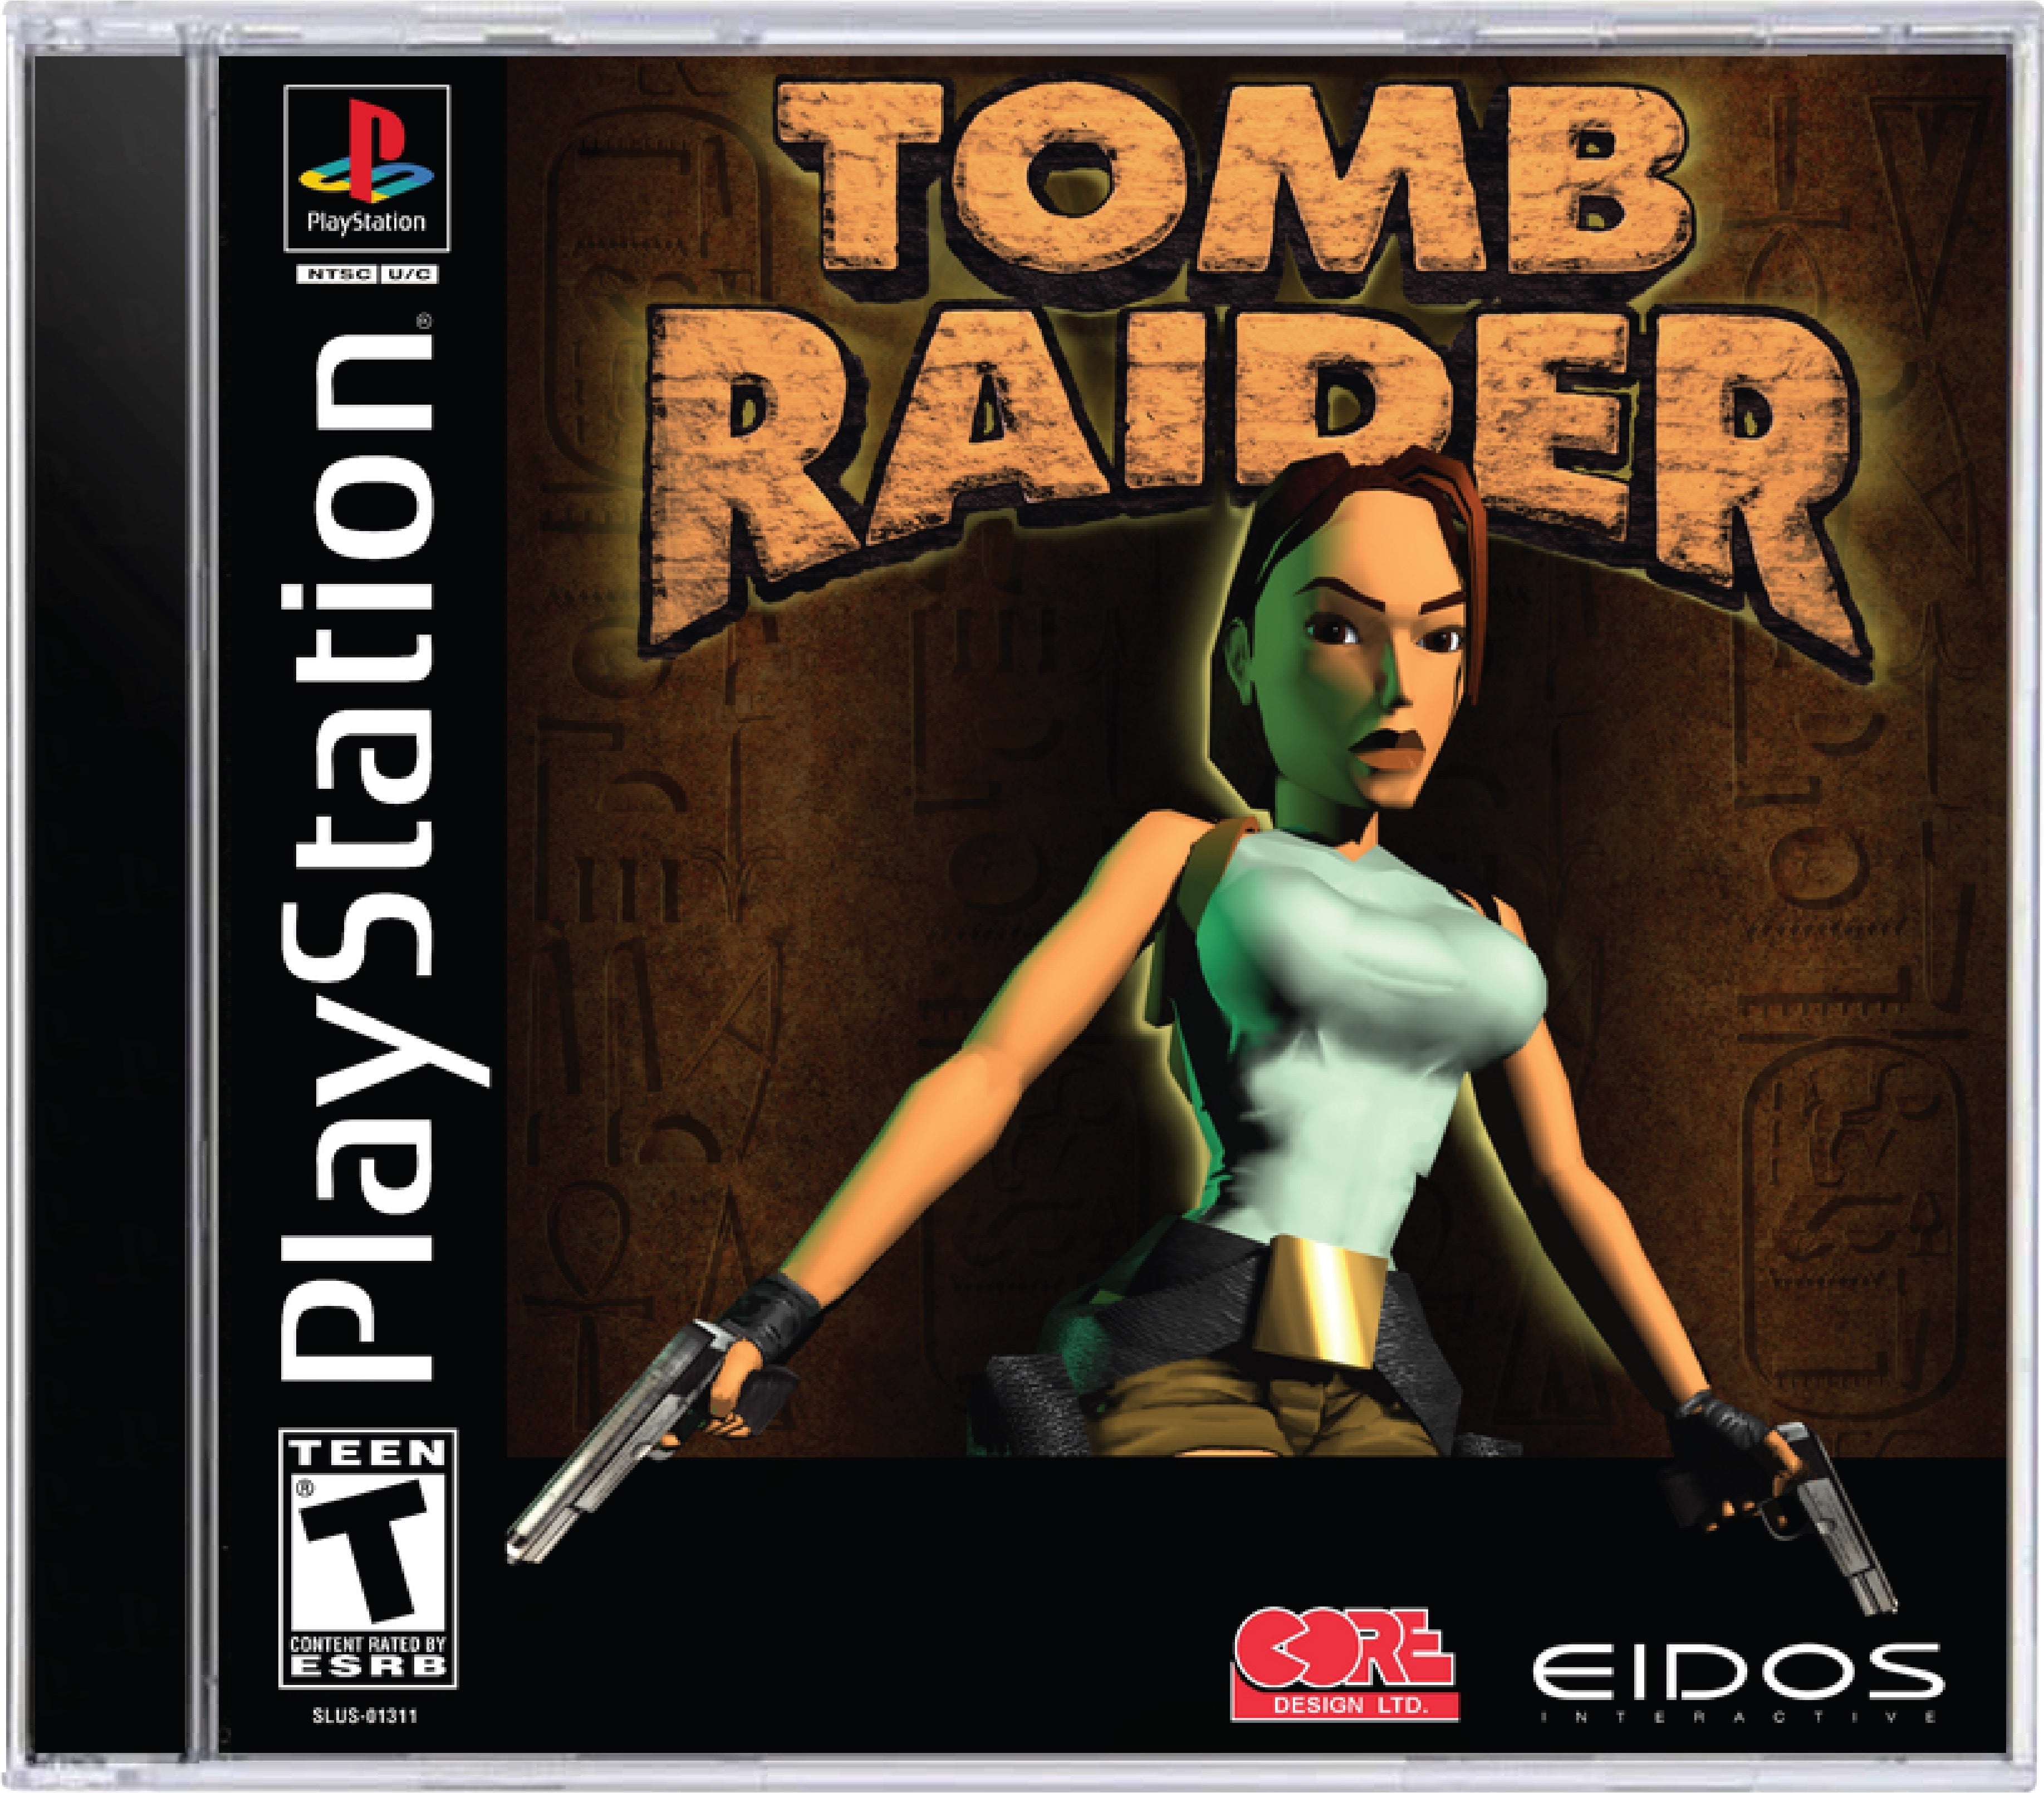 Tomb Raider Cover Art and Product Photo